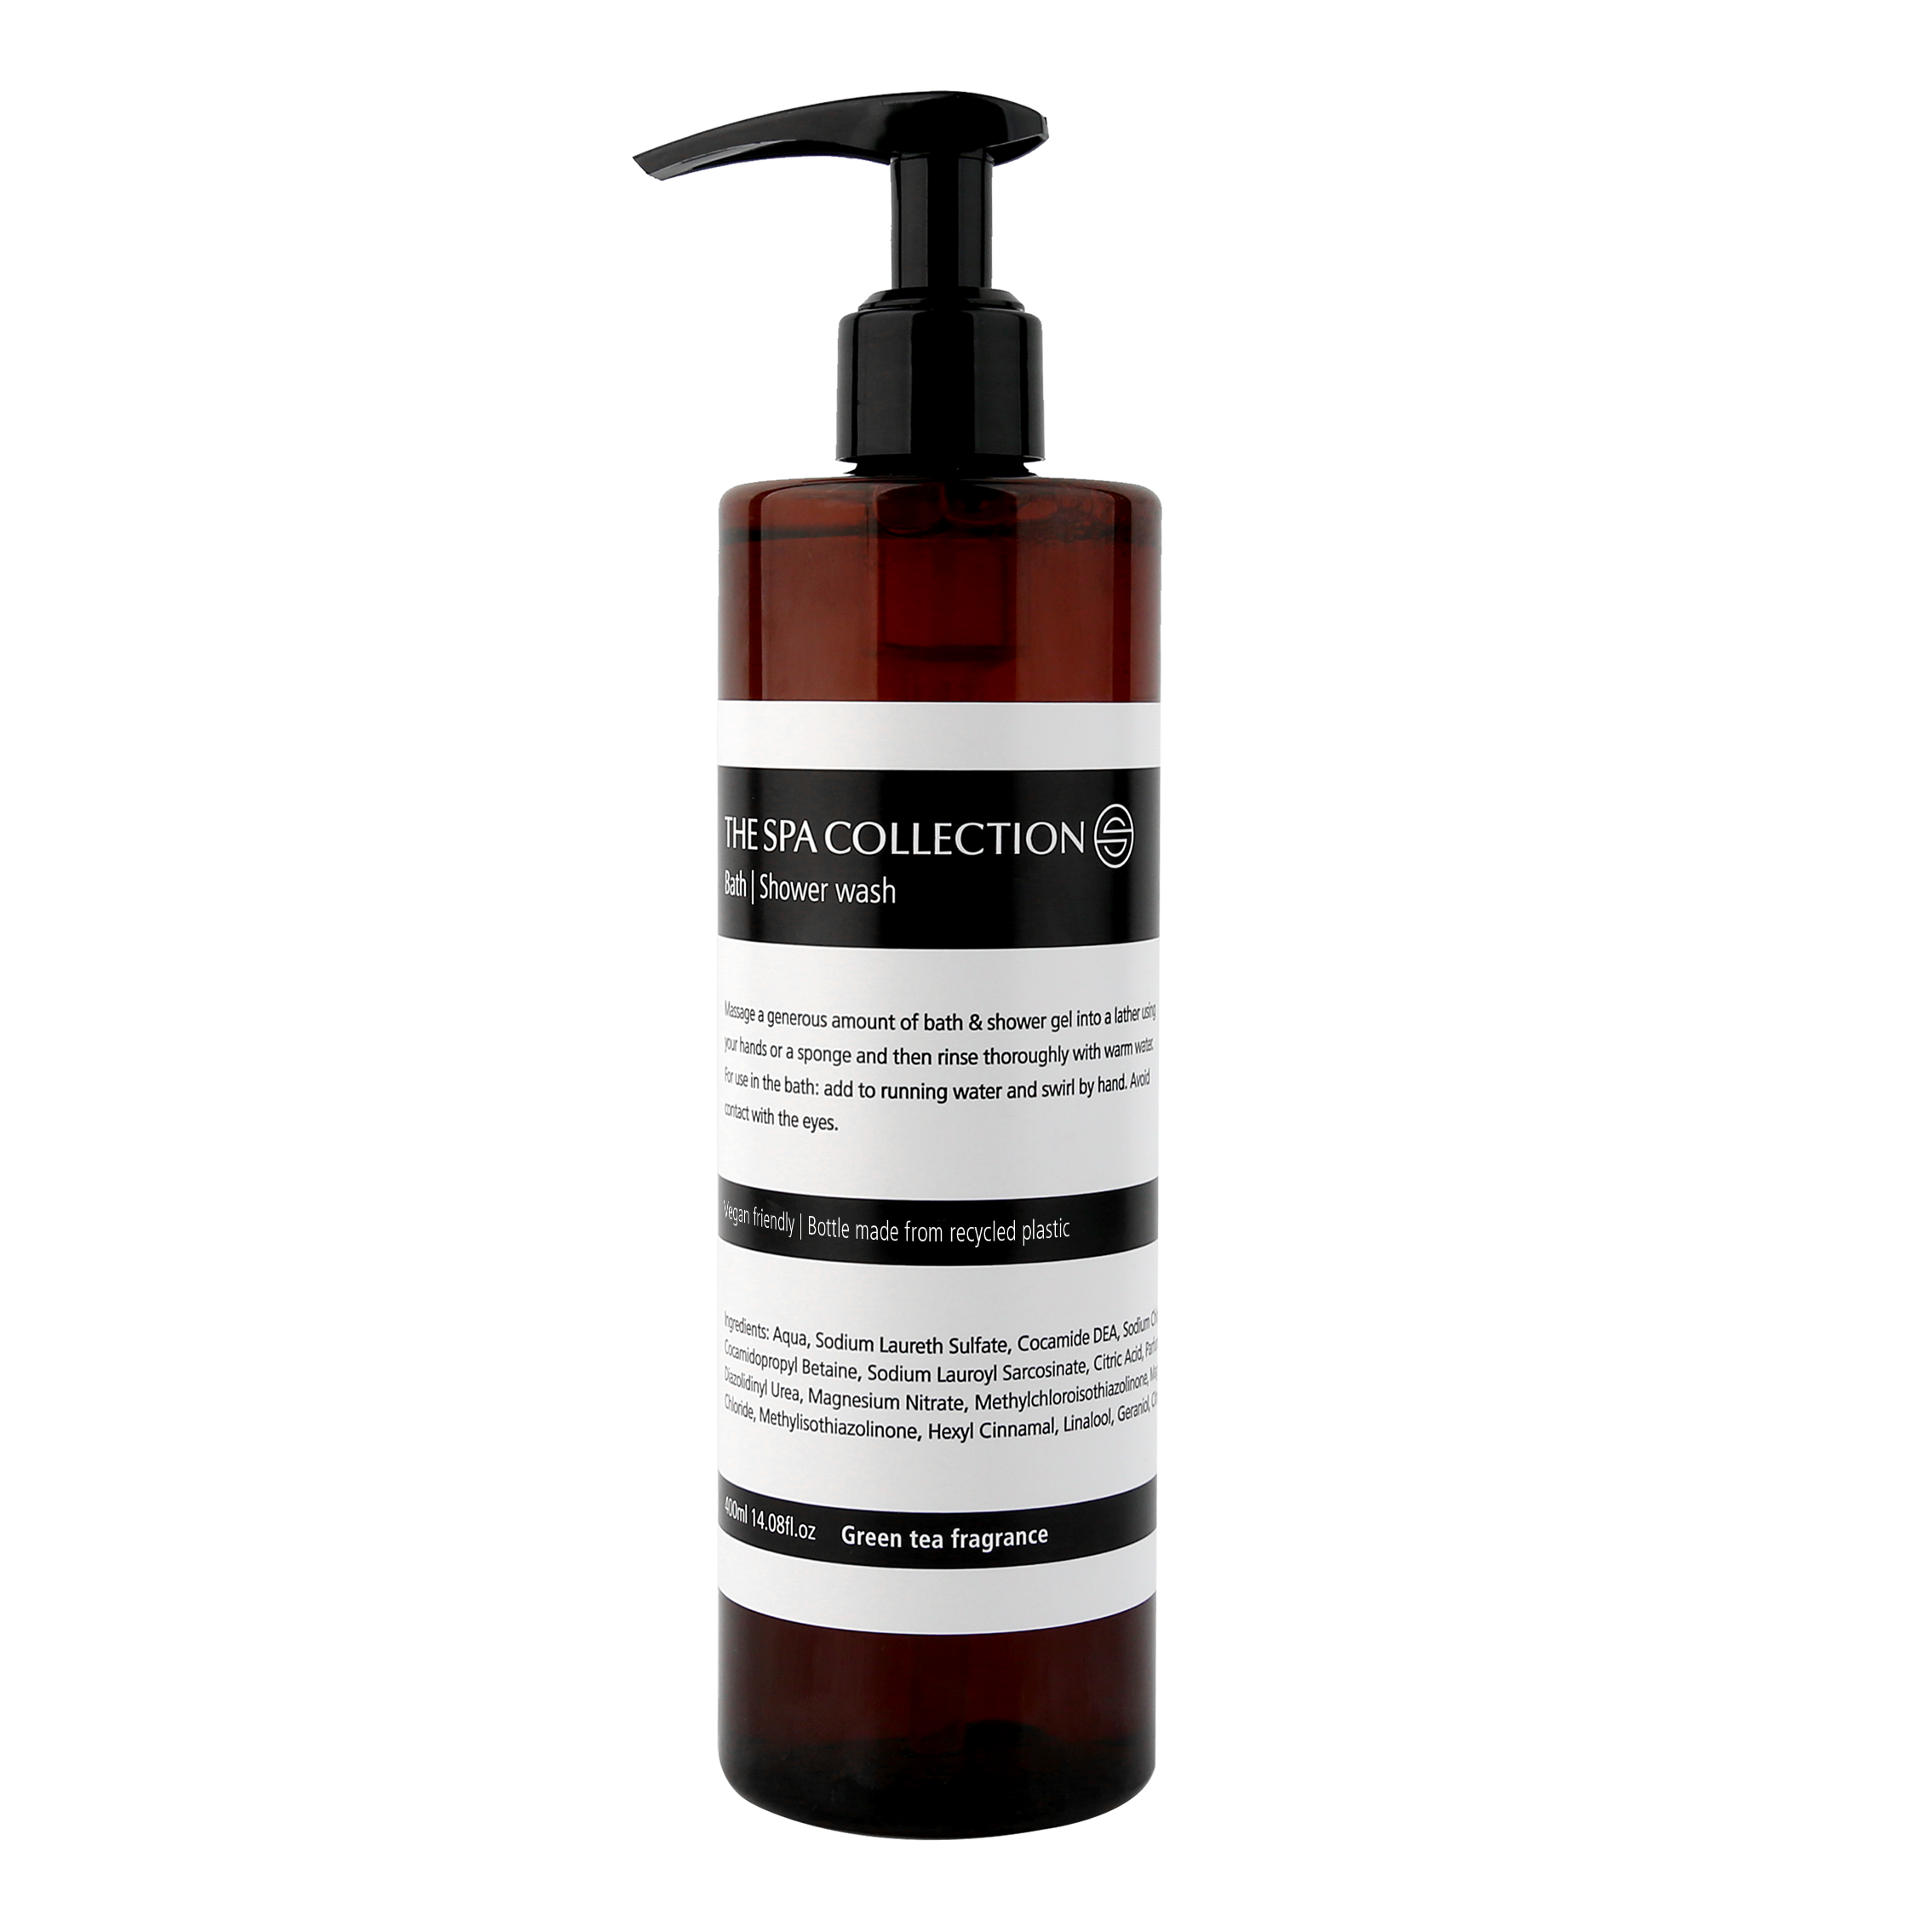 Vegan friendly luxurious body wash with green tee fragrance by The Spa Collection, in pharmacy-style modern bottle.